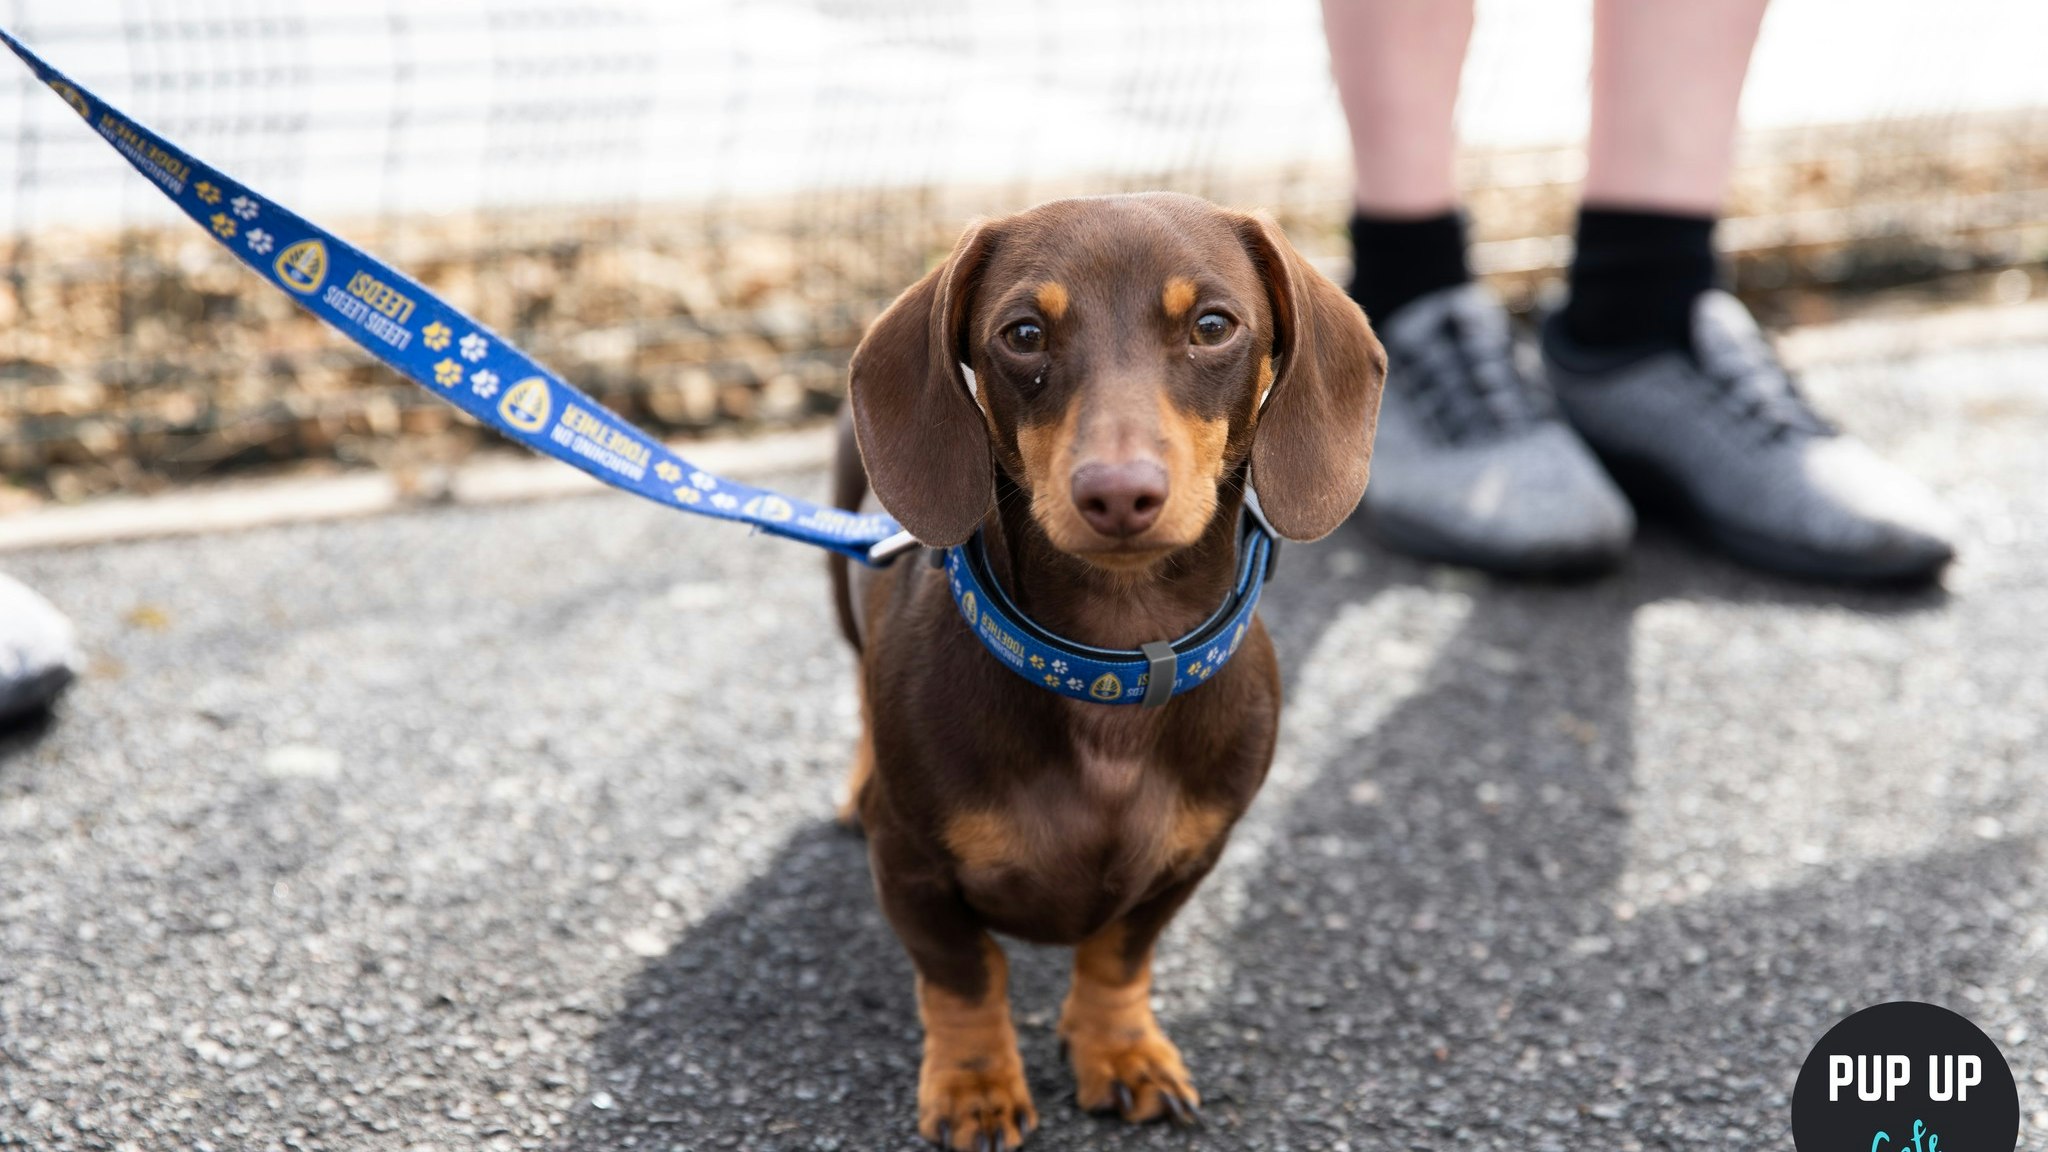 Dachshund Pup Up Cafe – Bournemouth